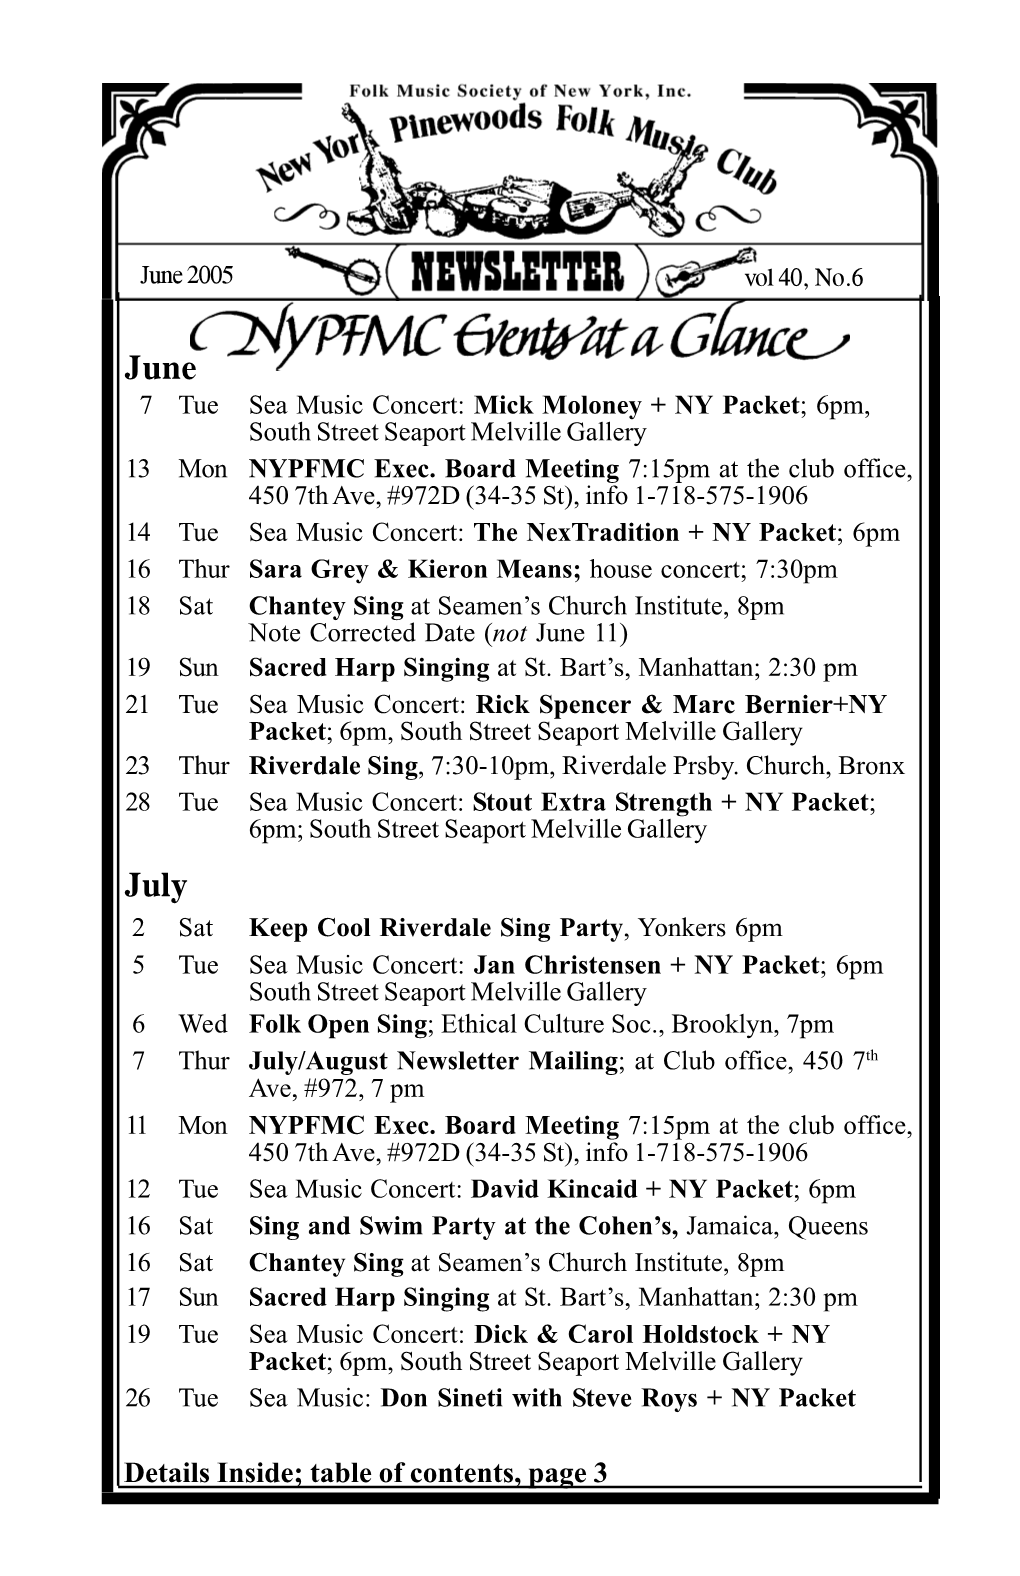 7 Tue Sea Music Concert: Mick Moloney + NY Packet; 6Pm, South Street Seaport Melville Gallery 13 Mon NYPFMC Exec